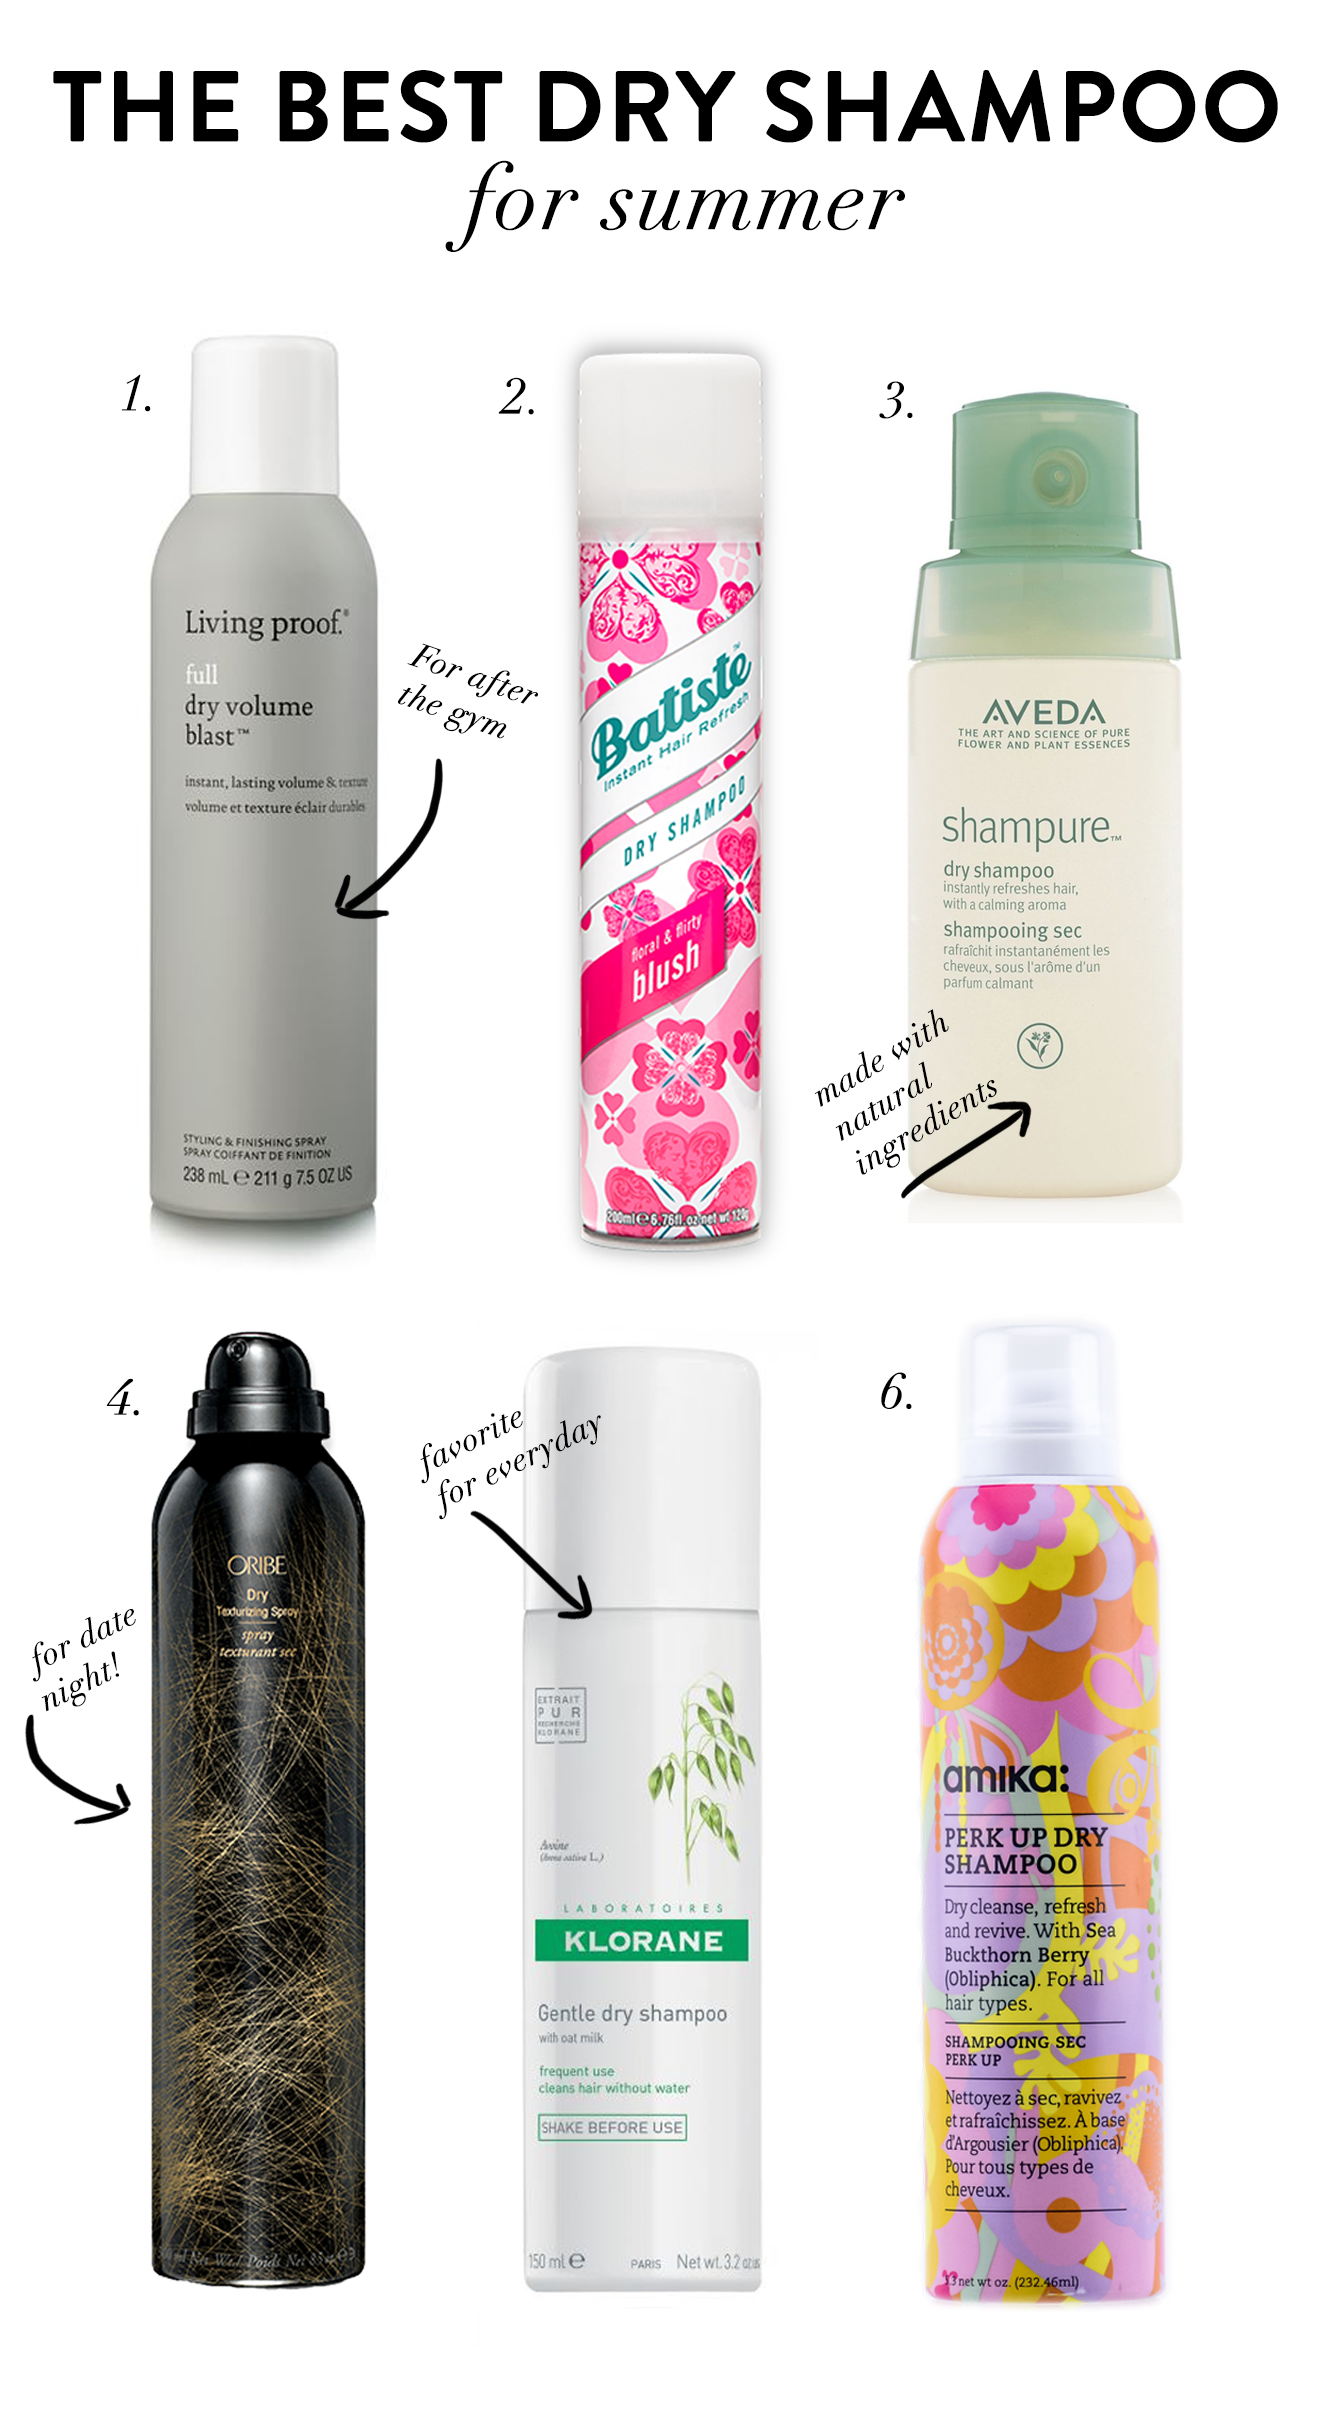 The Dry Shampoos Styled